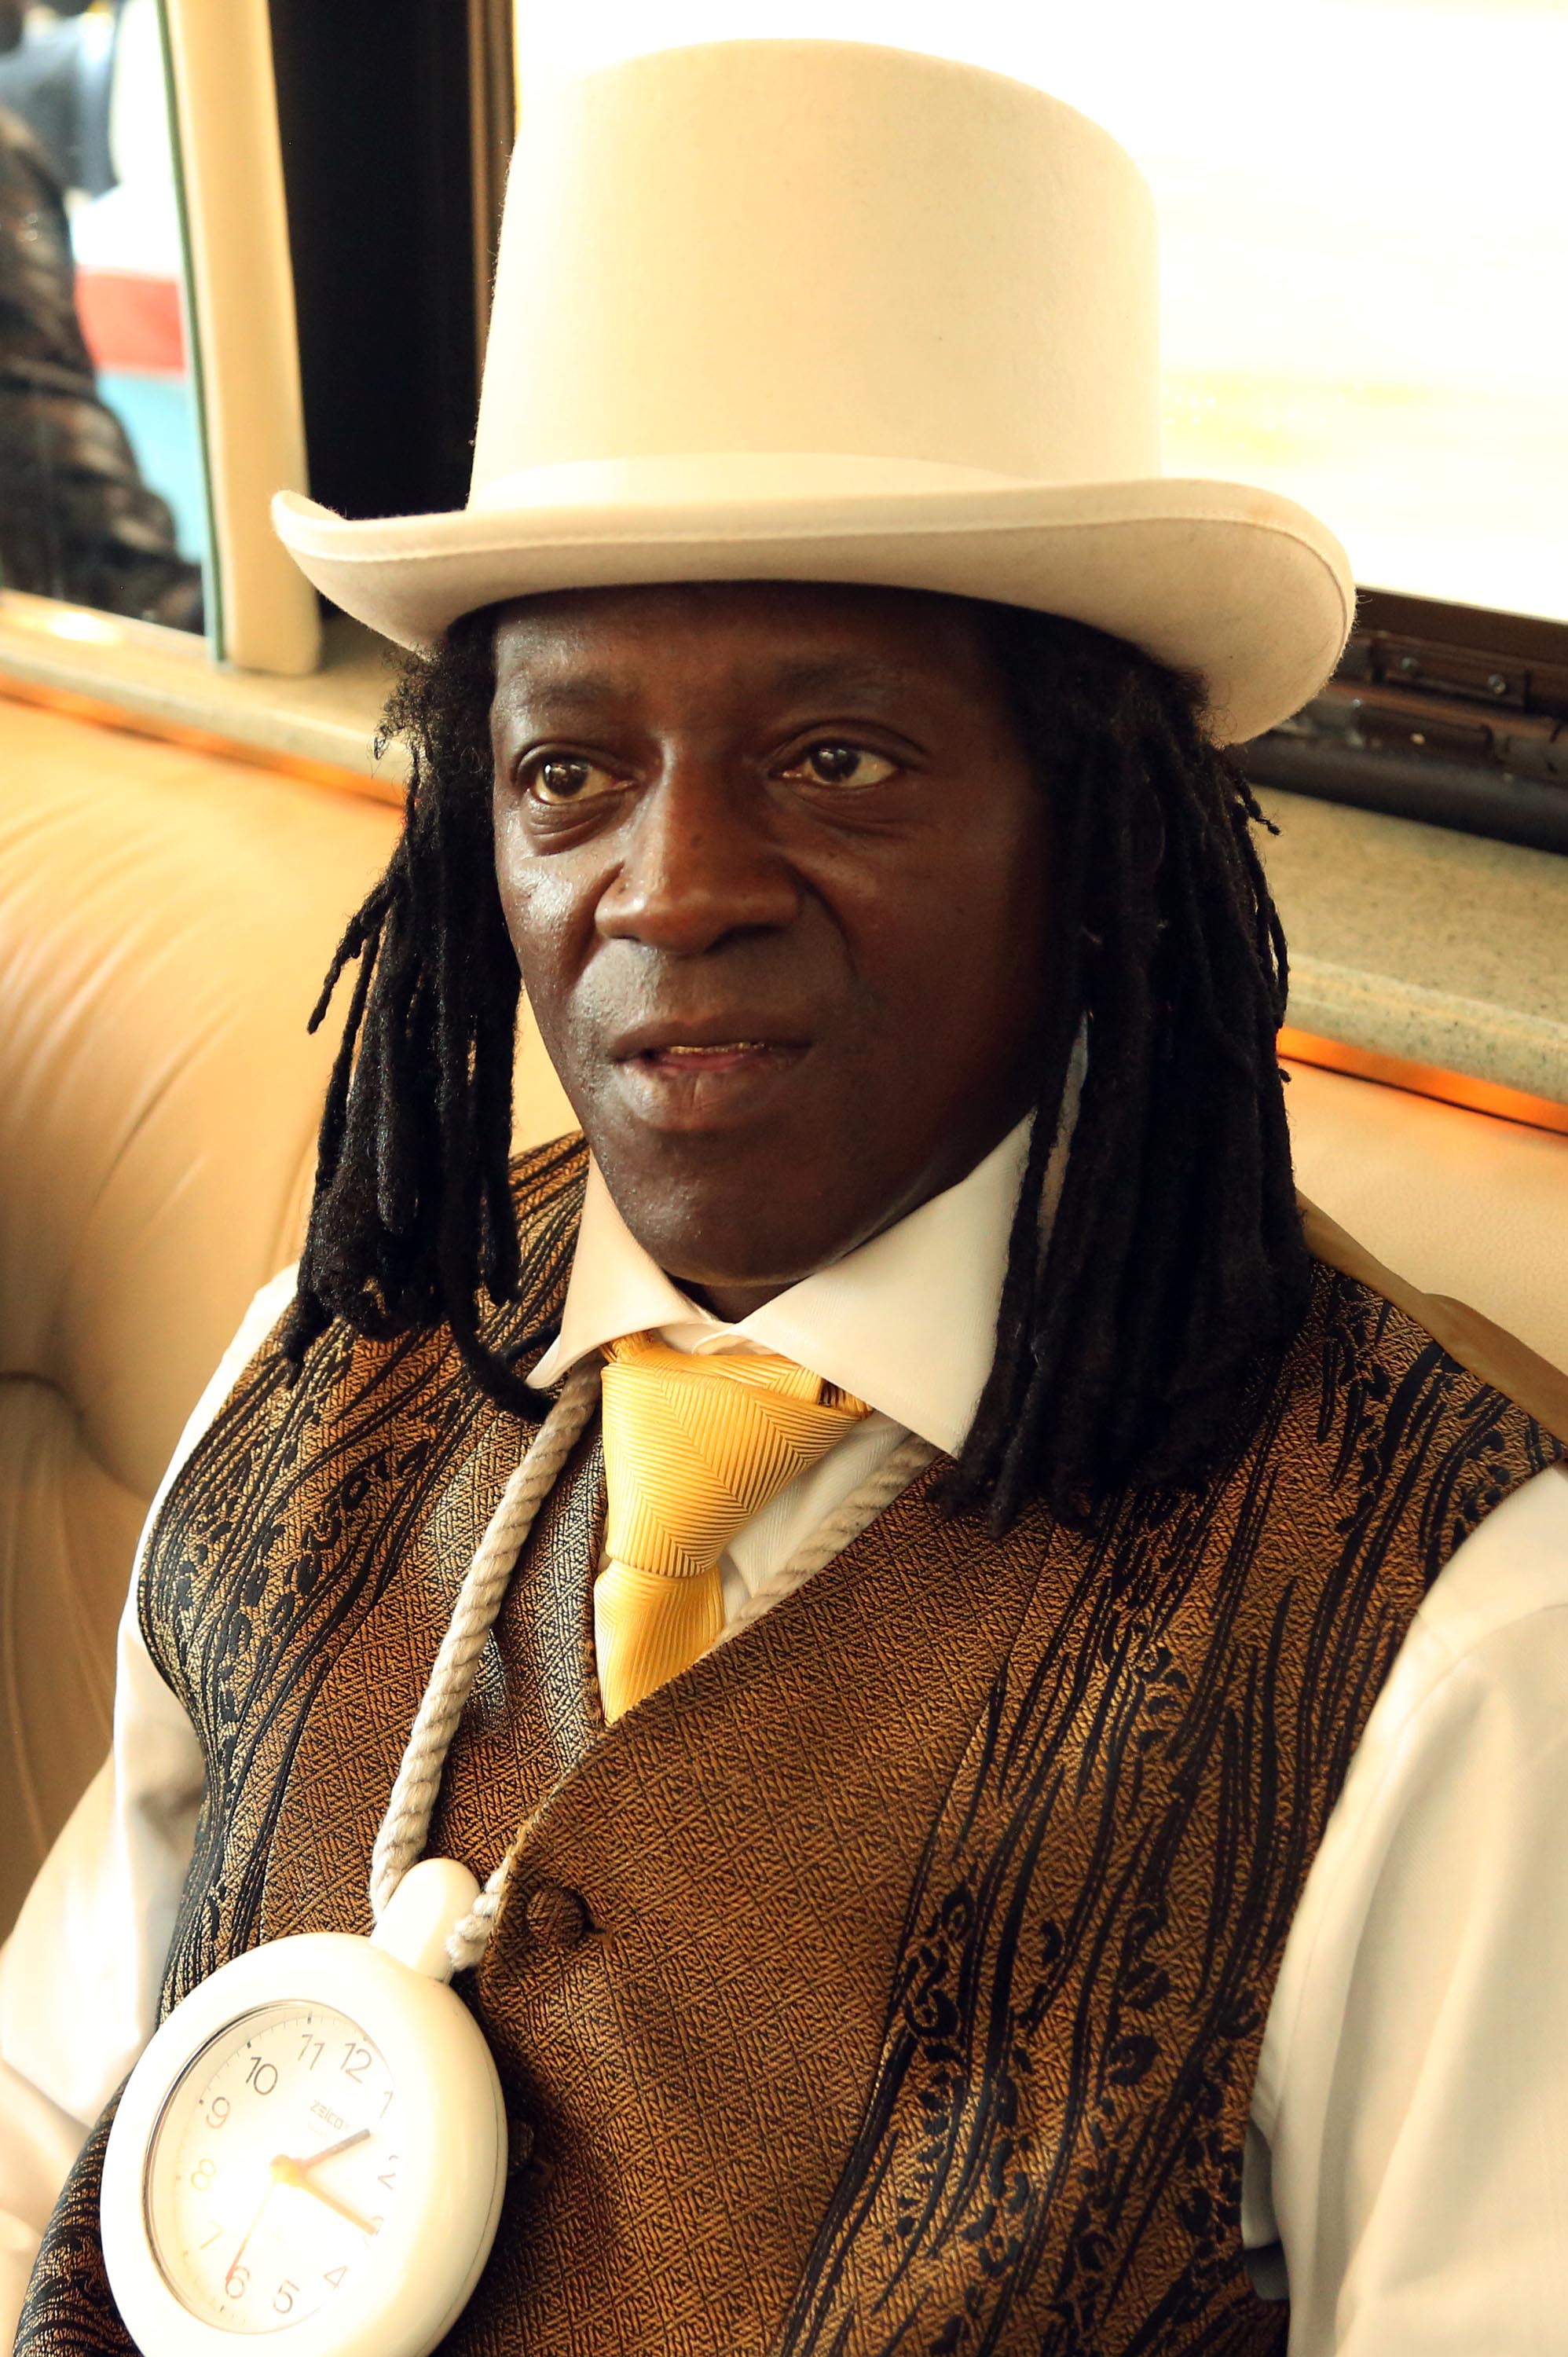 Flavor Flav attends the Centric Celebrates Selma event on March 8, 2015 in Selma, Alabama.